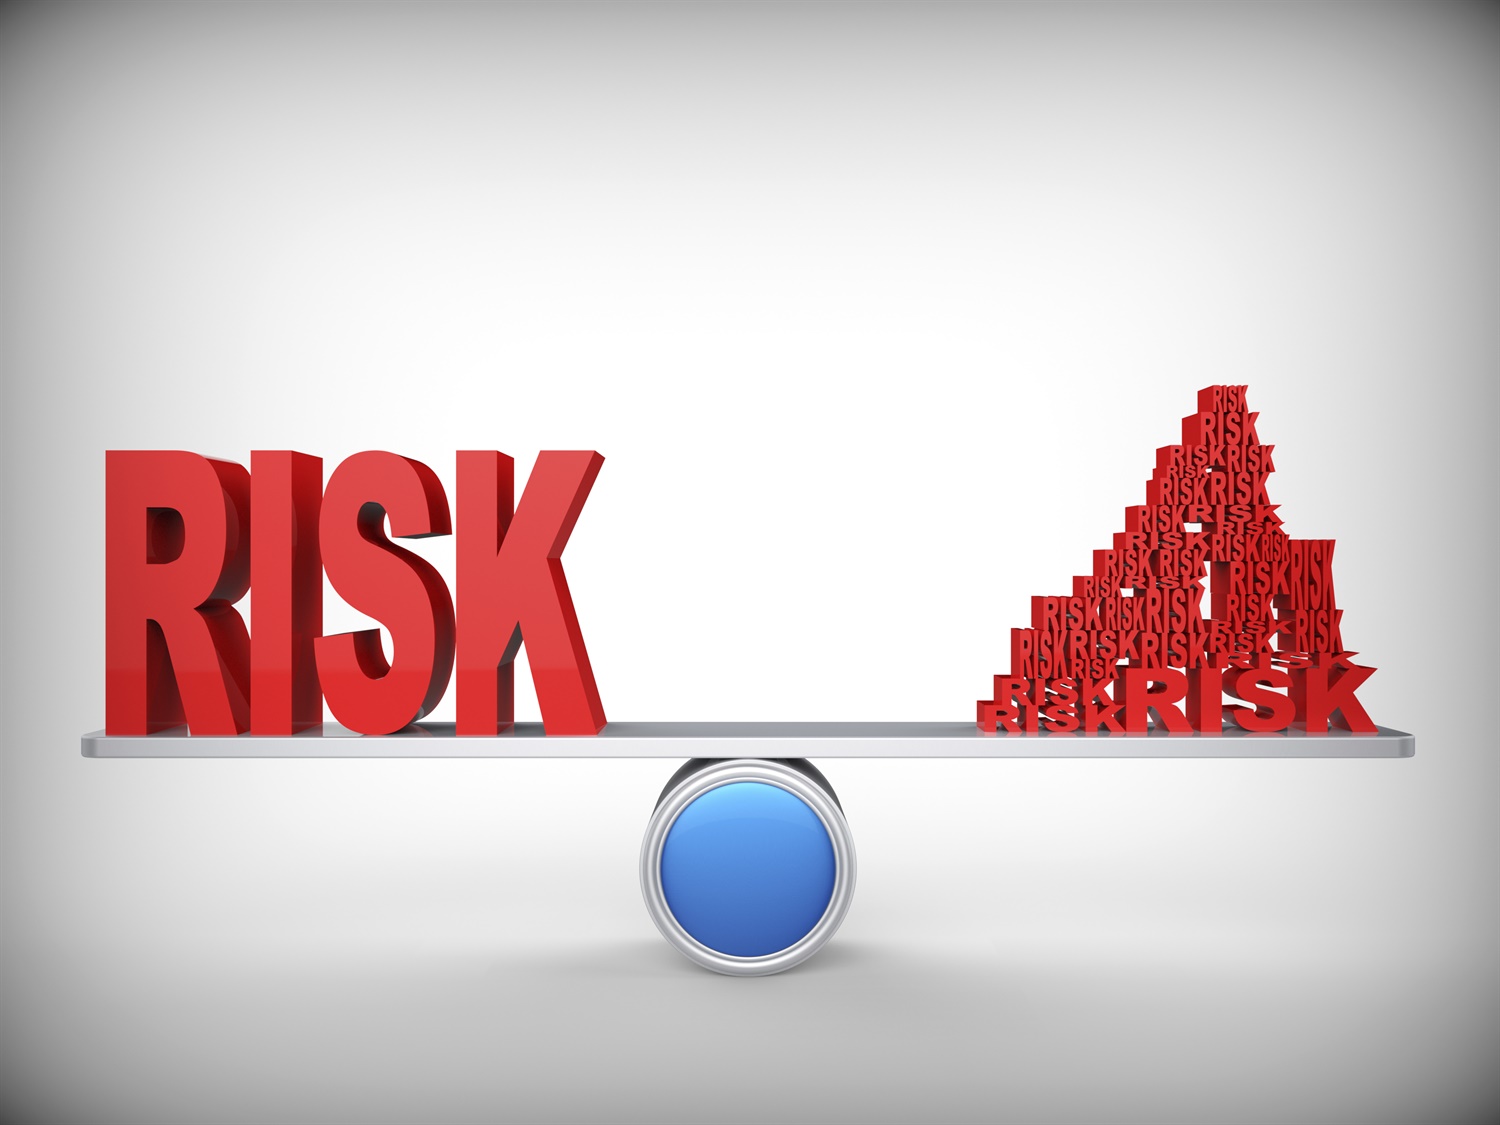 Safety researchers to develop next generation of risk models 